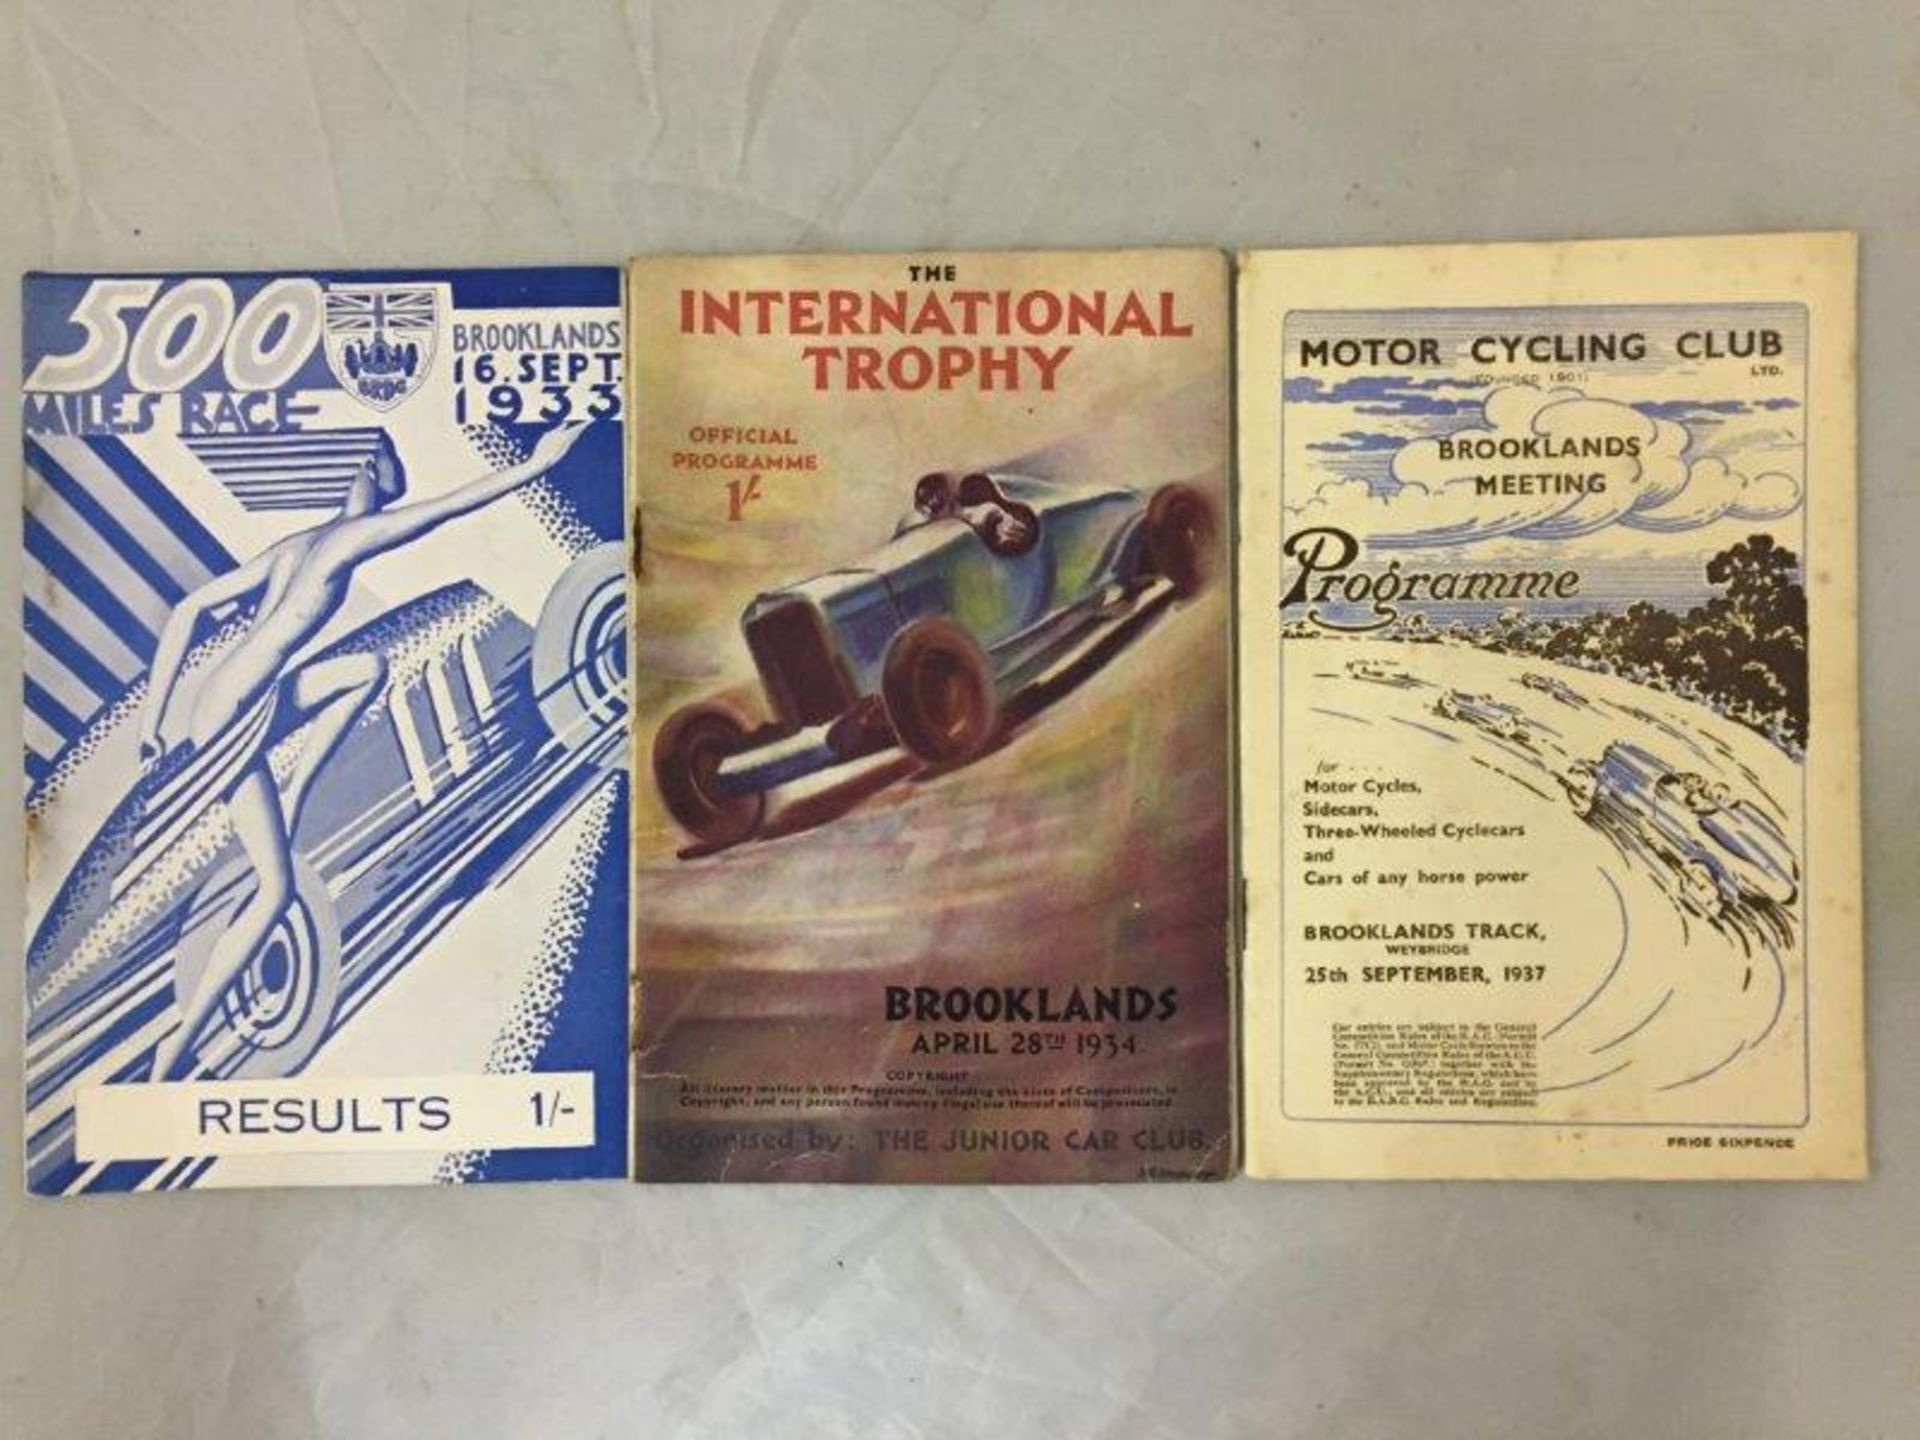 A Brooklands Meeting programme for the Motorcycling Club limited, 25th September 1937, a programme